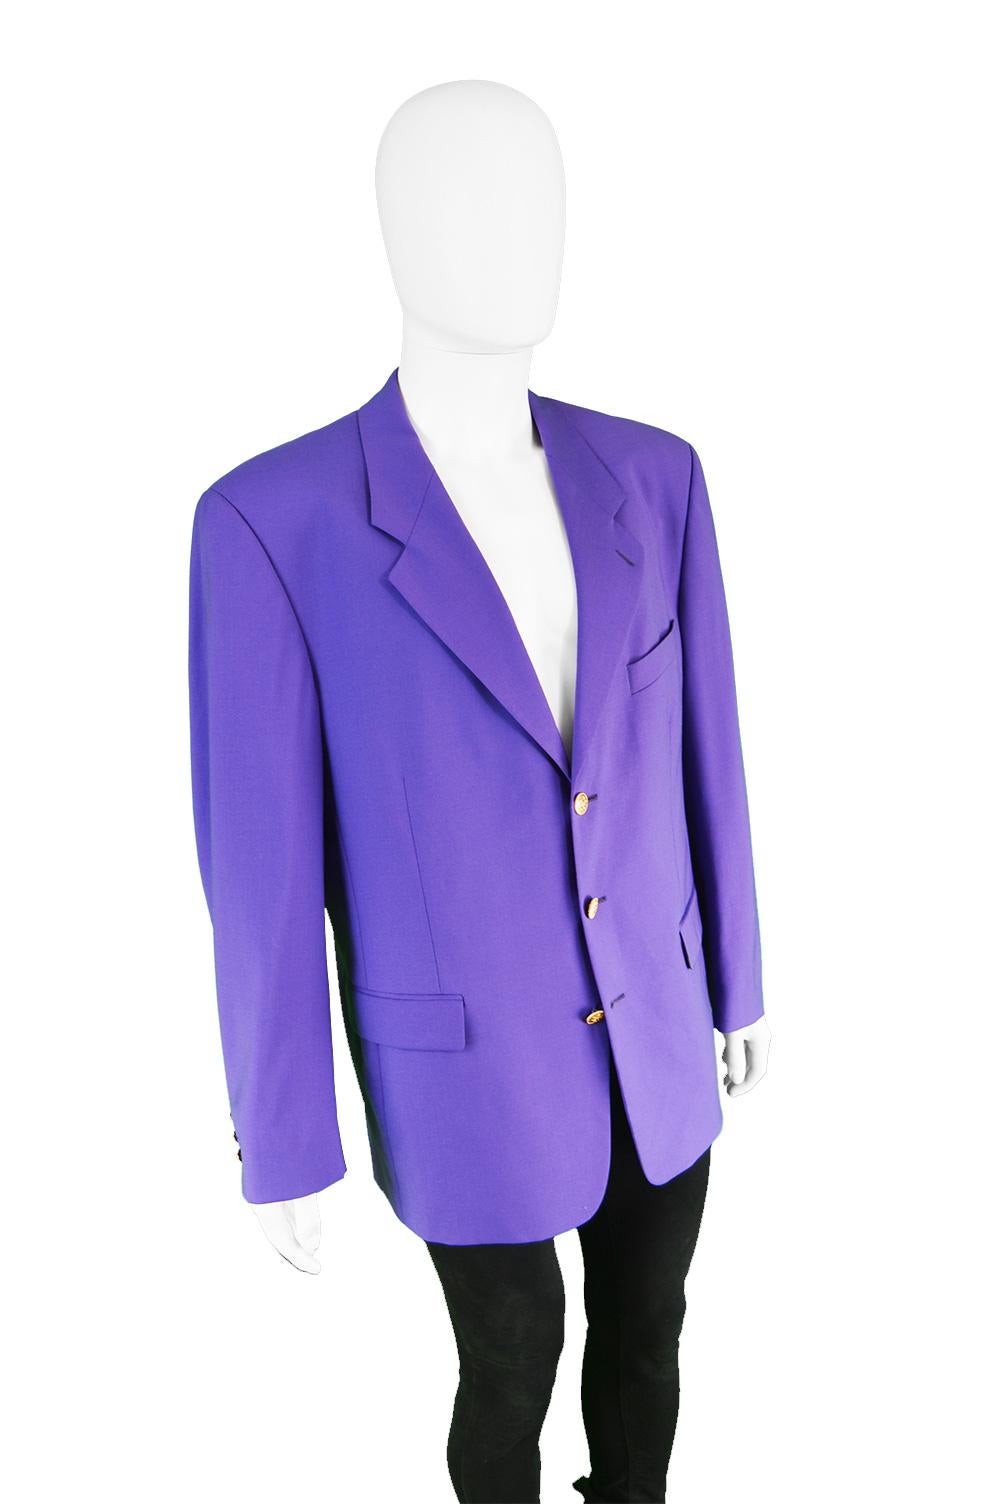 Kenzo Vintage Men's Bright Purple Pure Worsted Wool Blazer Jacket, 1980s For Sale 1